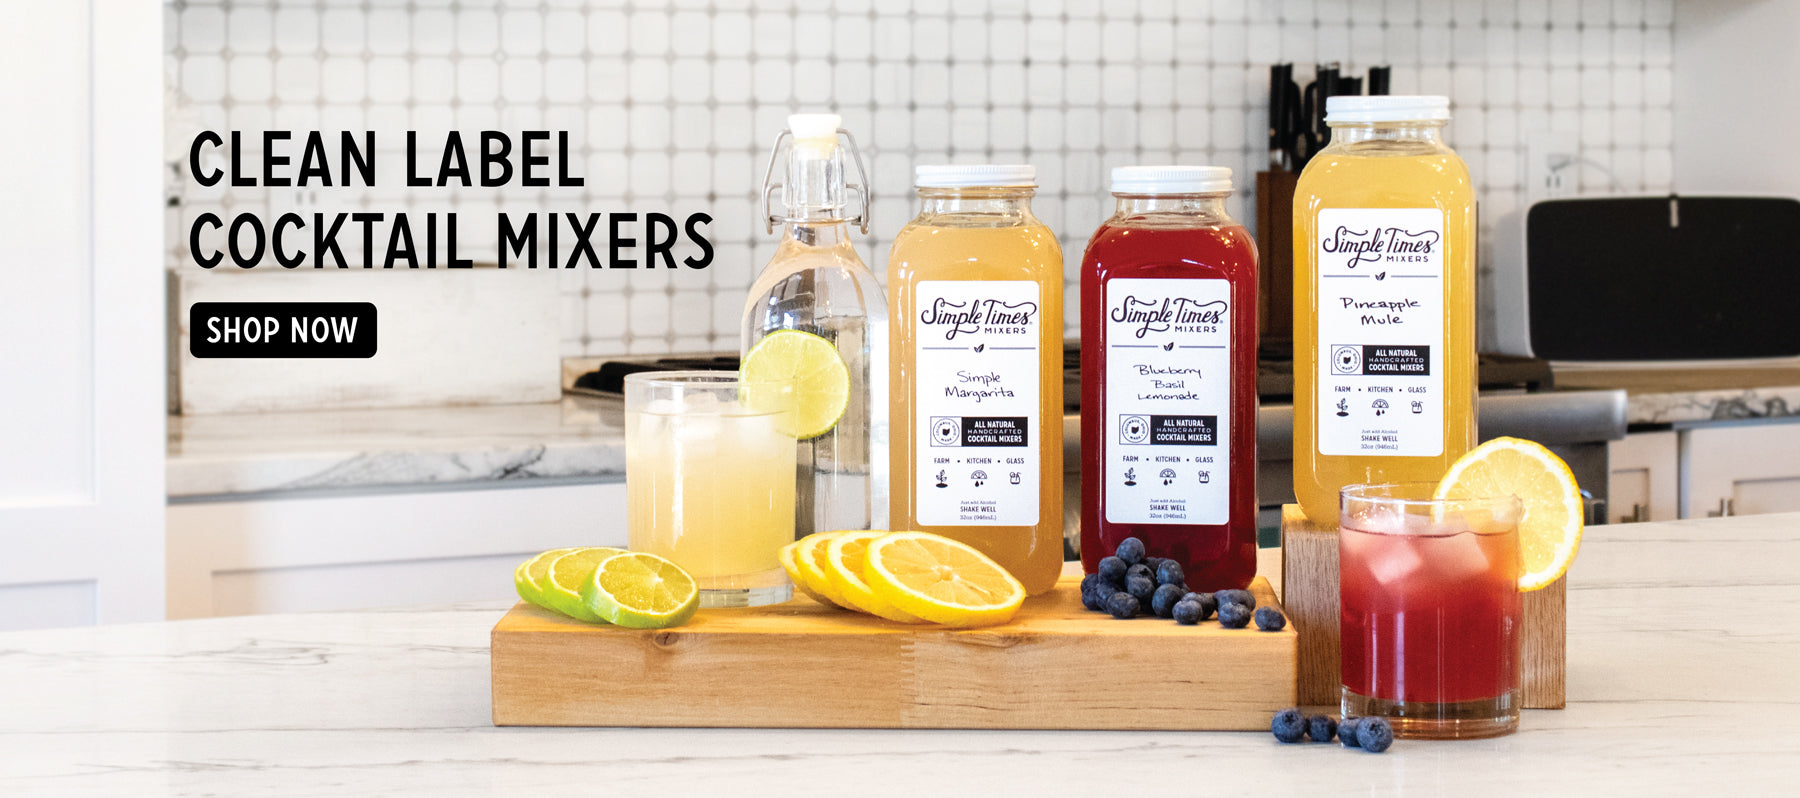 Simple Times Mixers - All Natural Cocktail Mixers